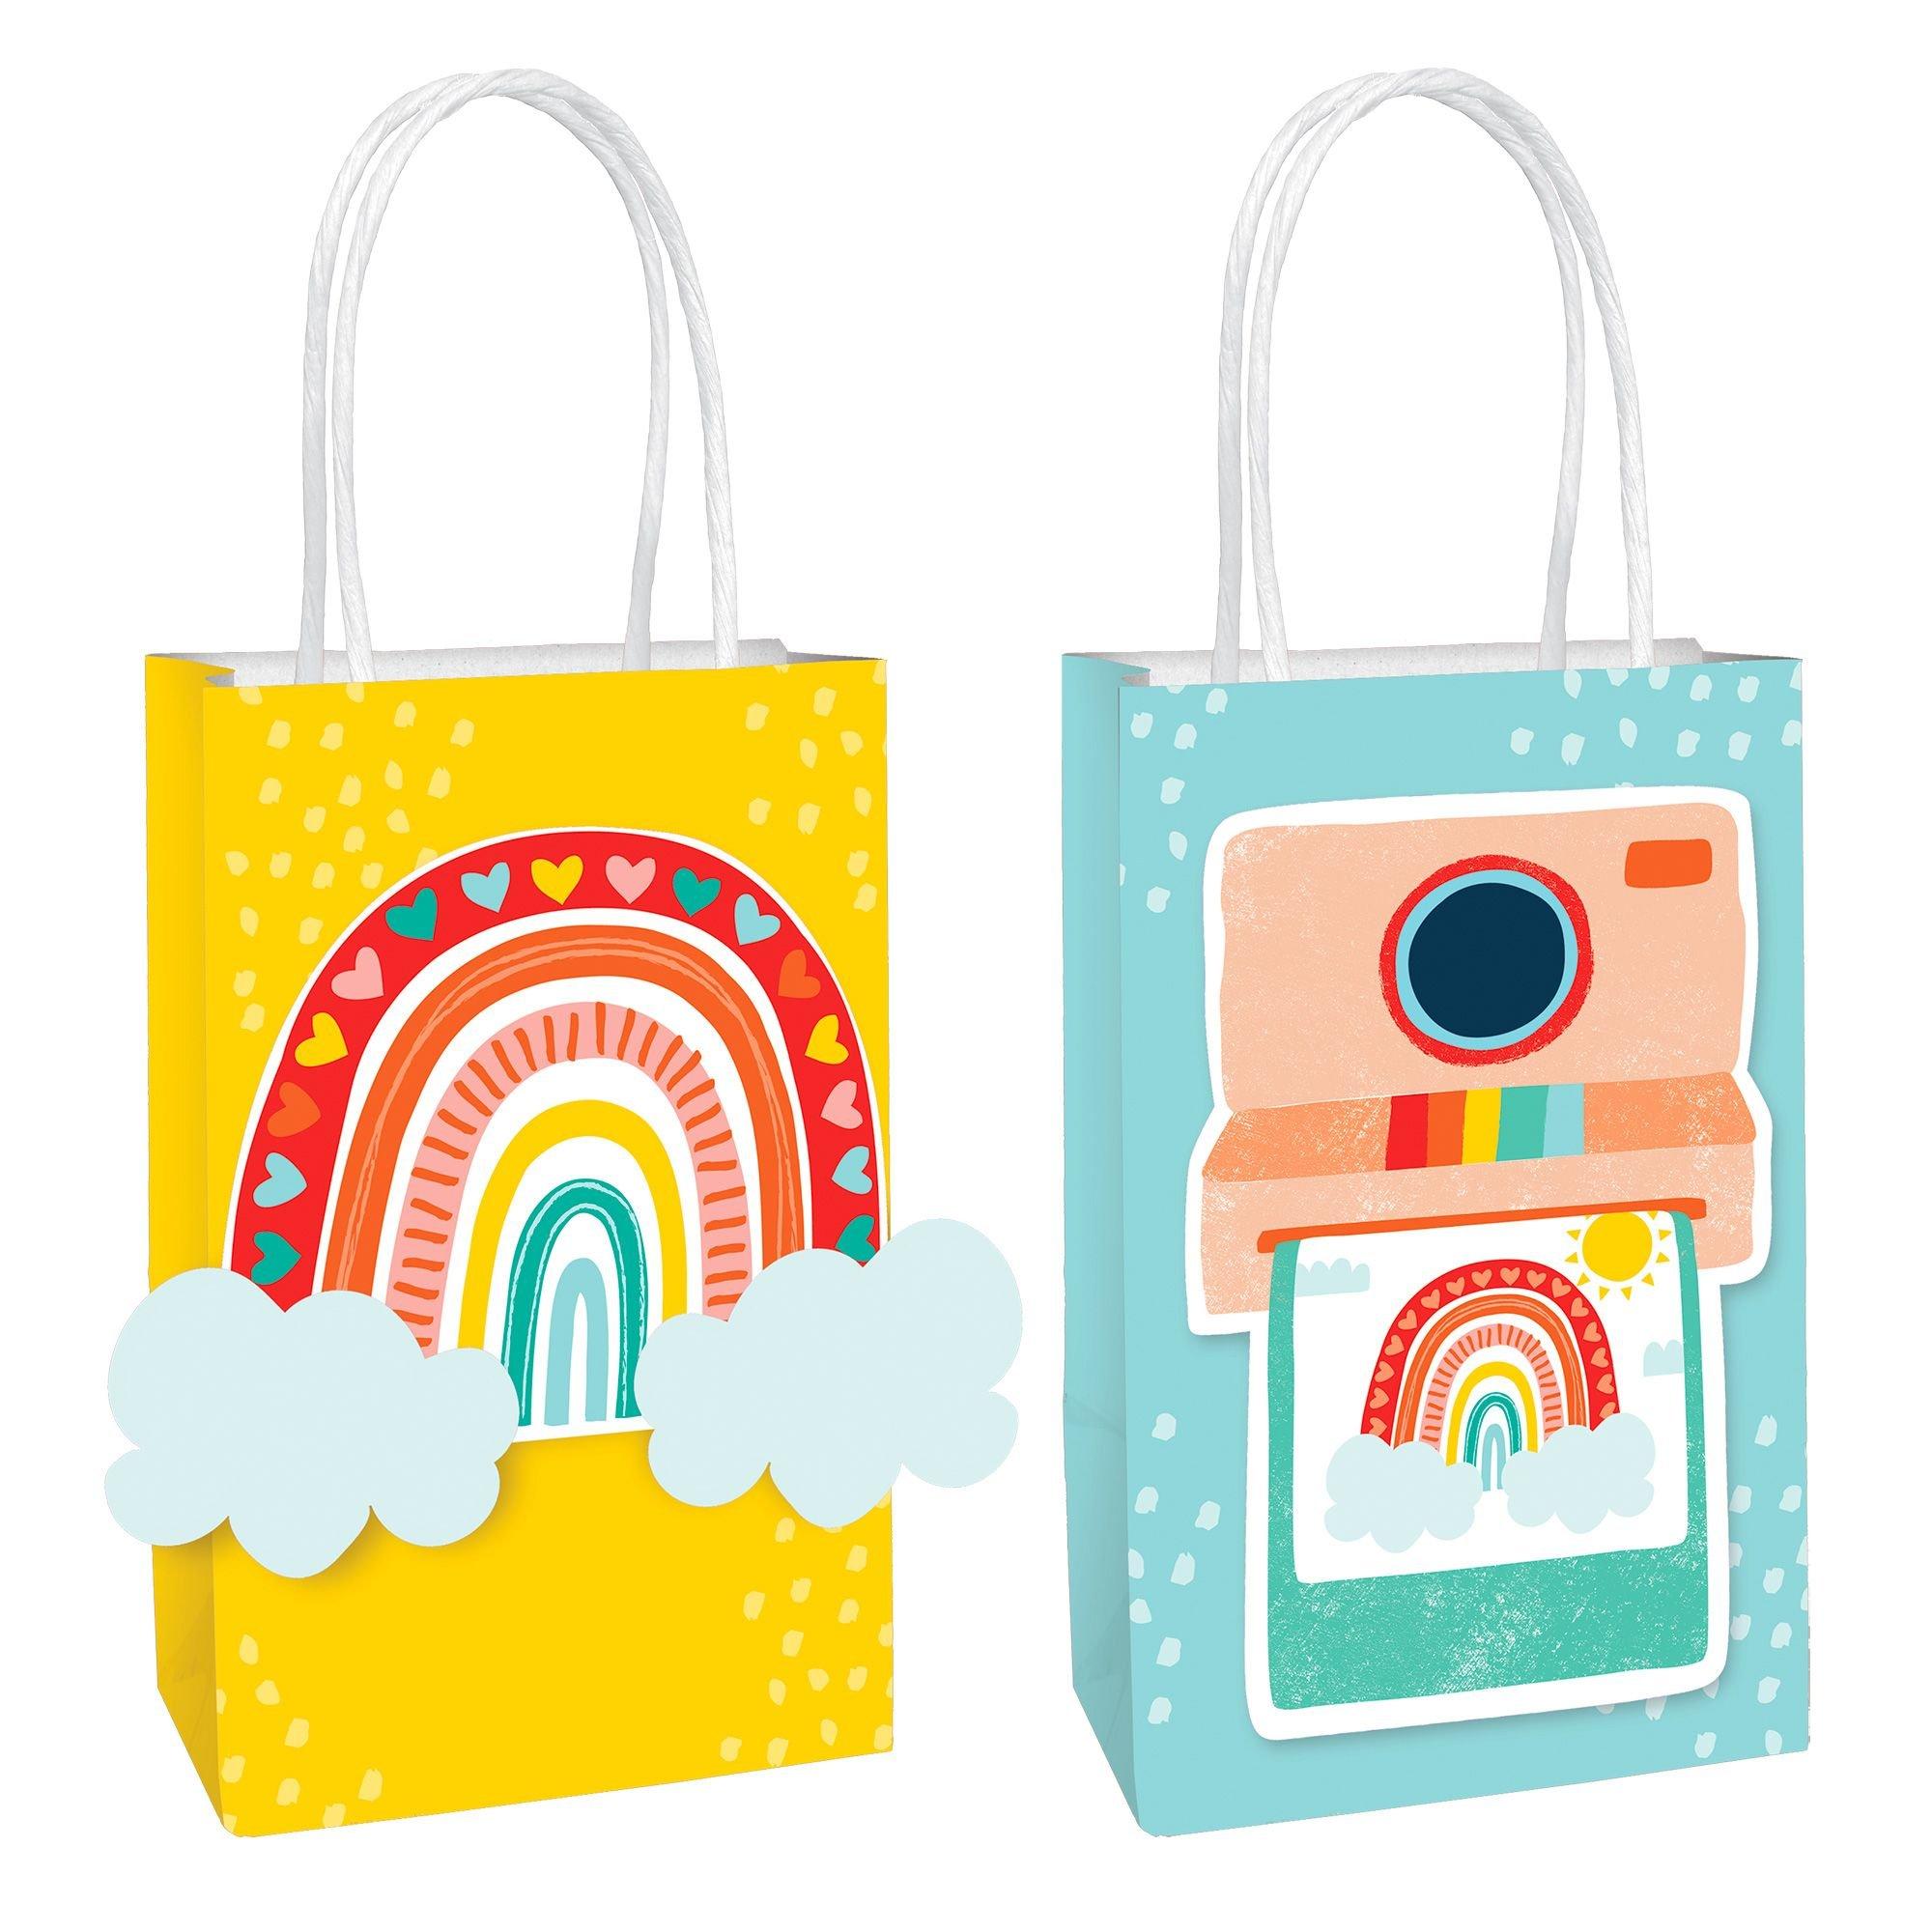 GITMIWS 32 Pcs Rainbow Party Gift Bags with Tissue - 8.7 Small Solid Color Kraft Paper Bags with Handles, Colorful Rainbow Party Favor Paper Goodie